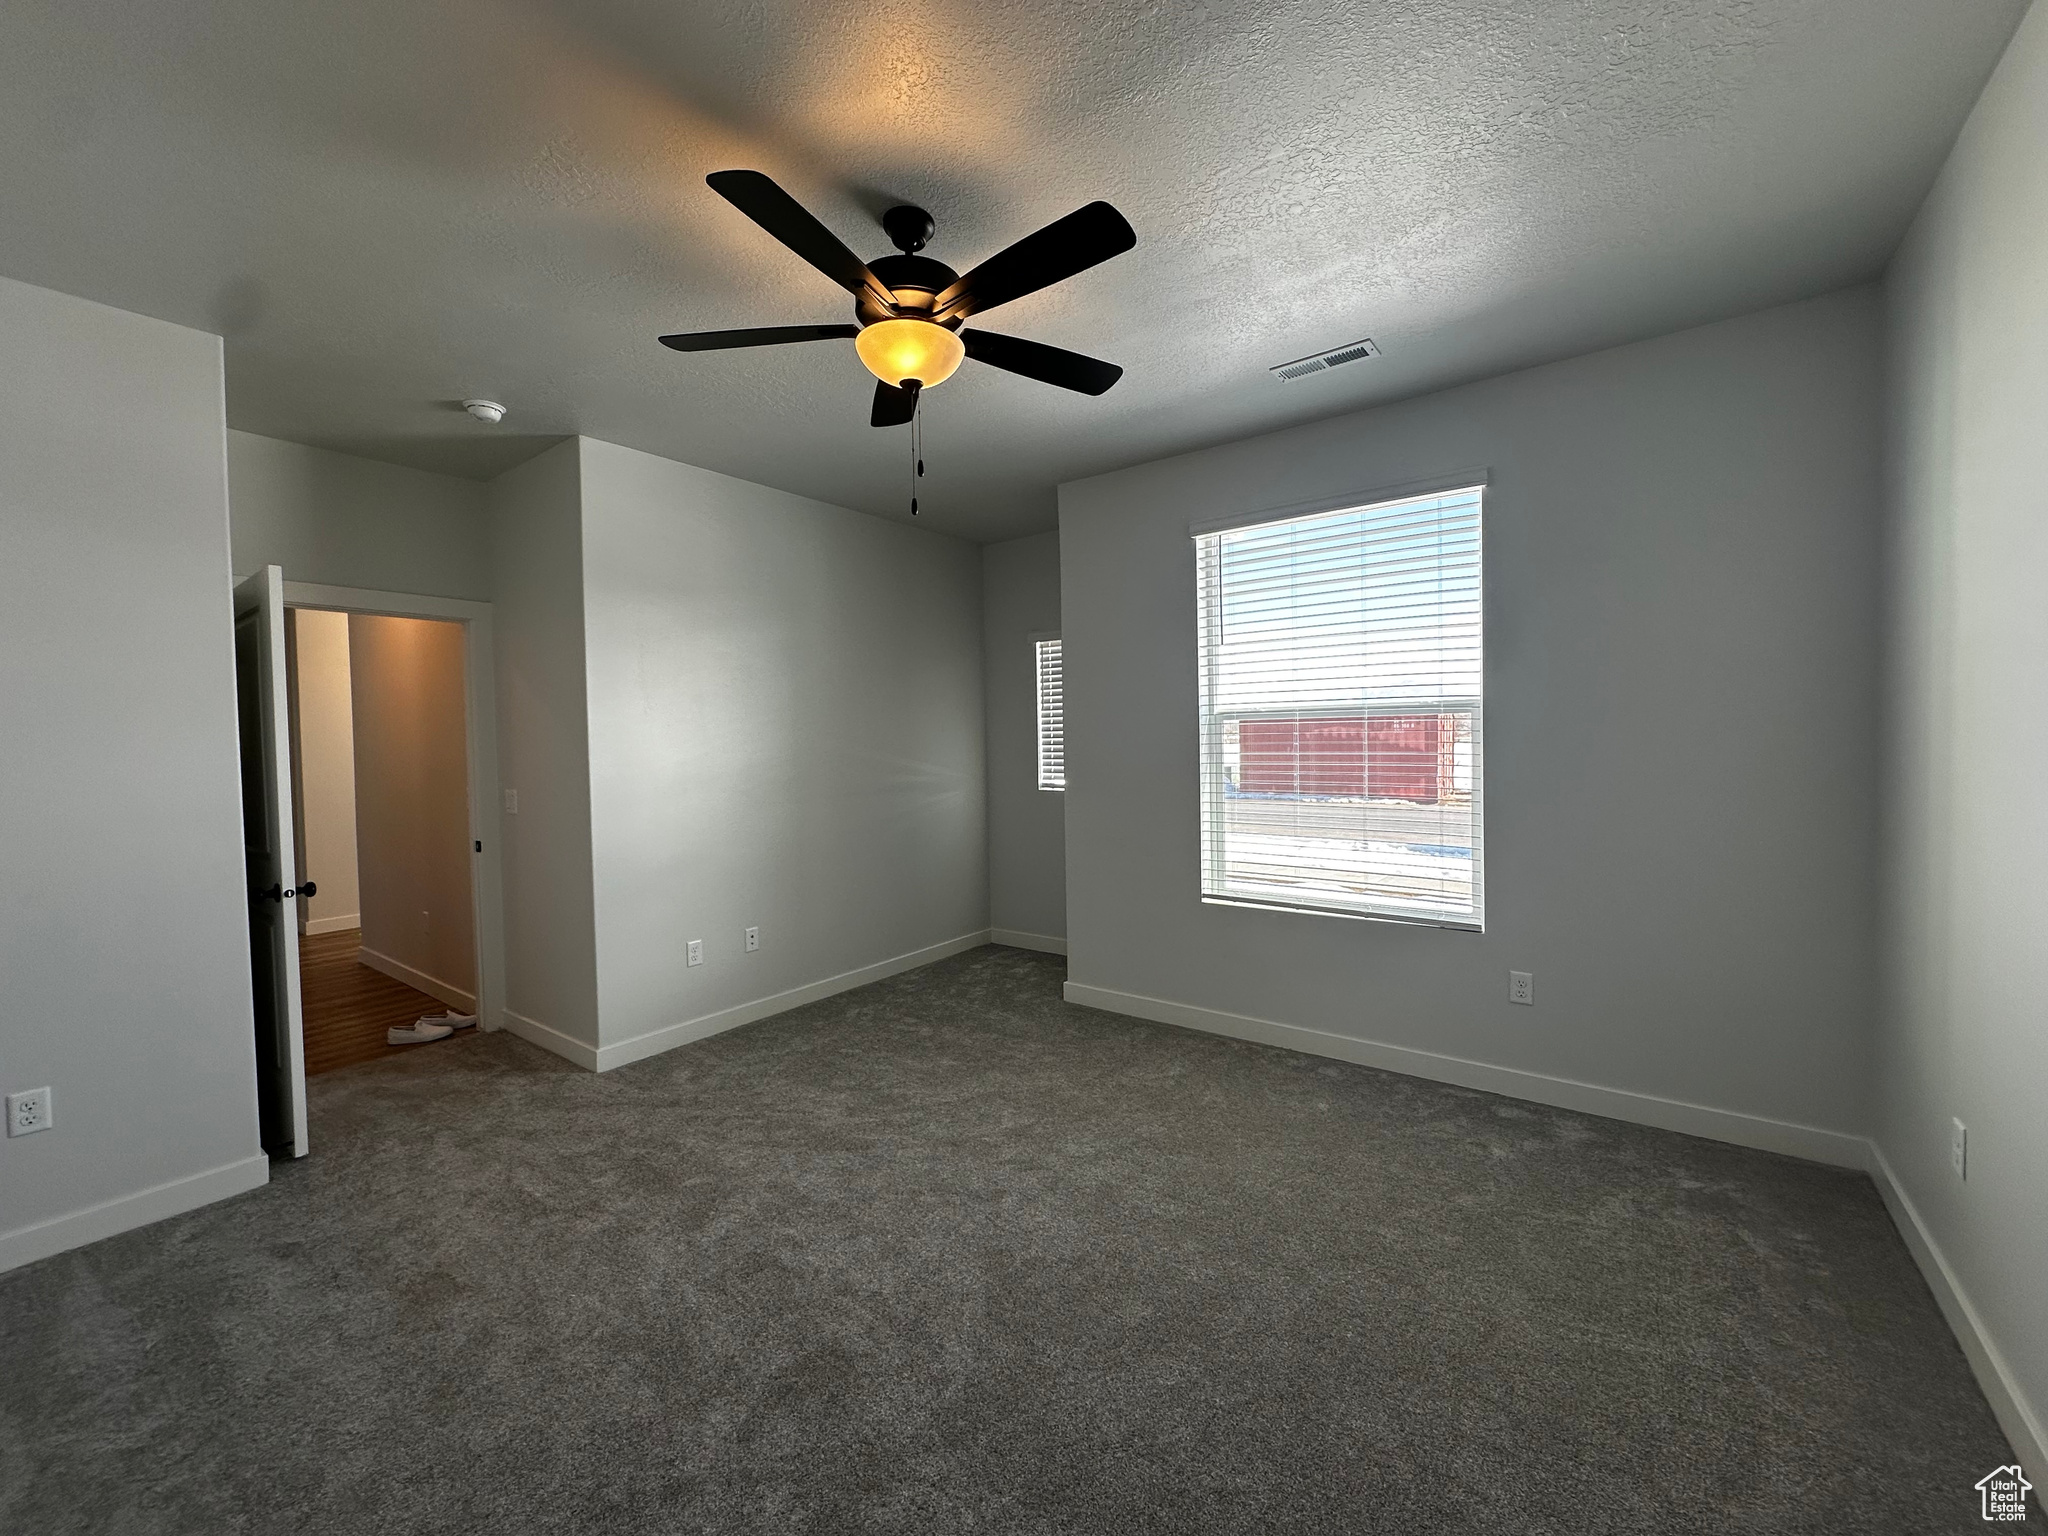 Carpeted spare room featuring a textured ceiling and ceiling fan